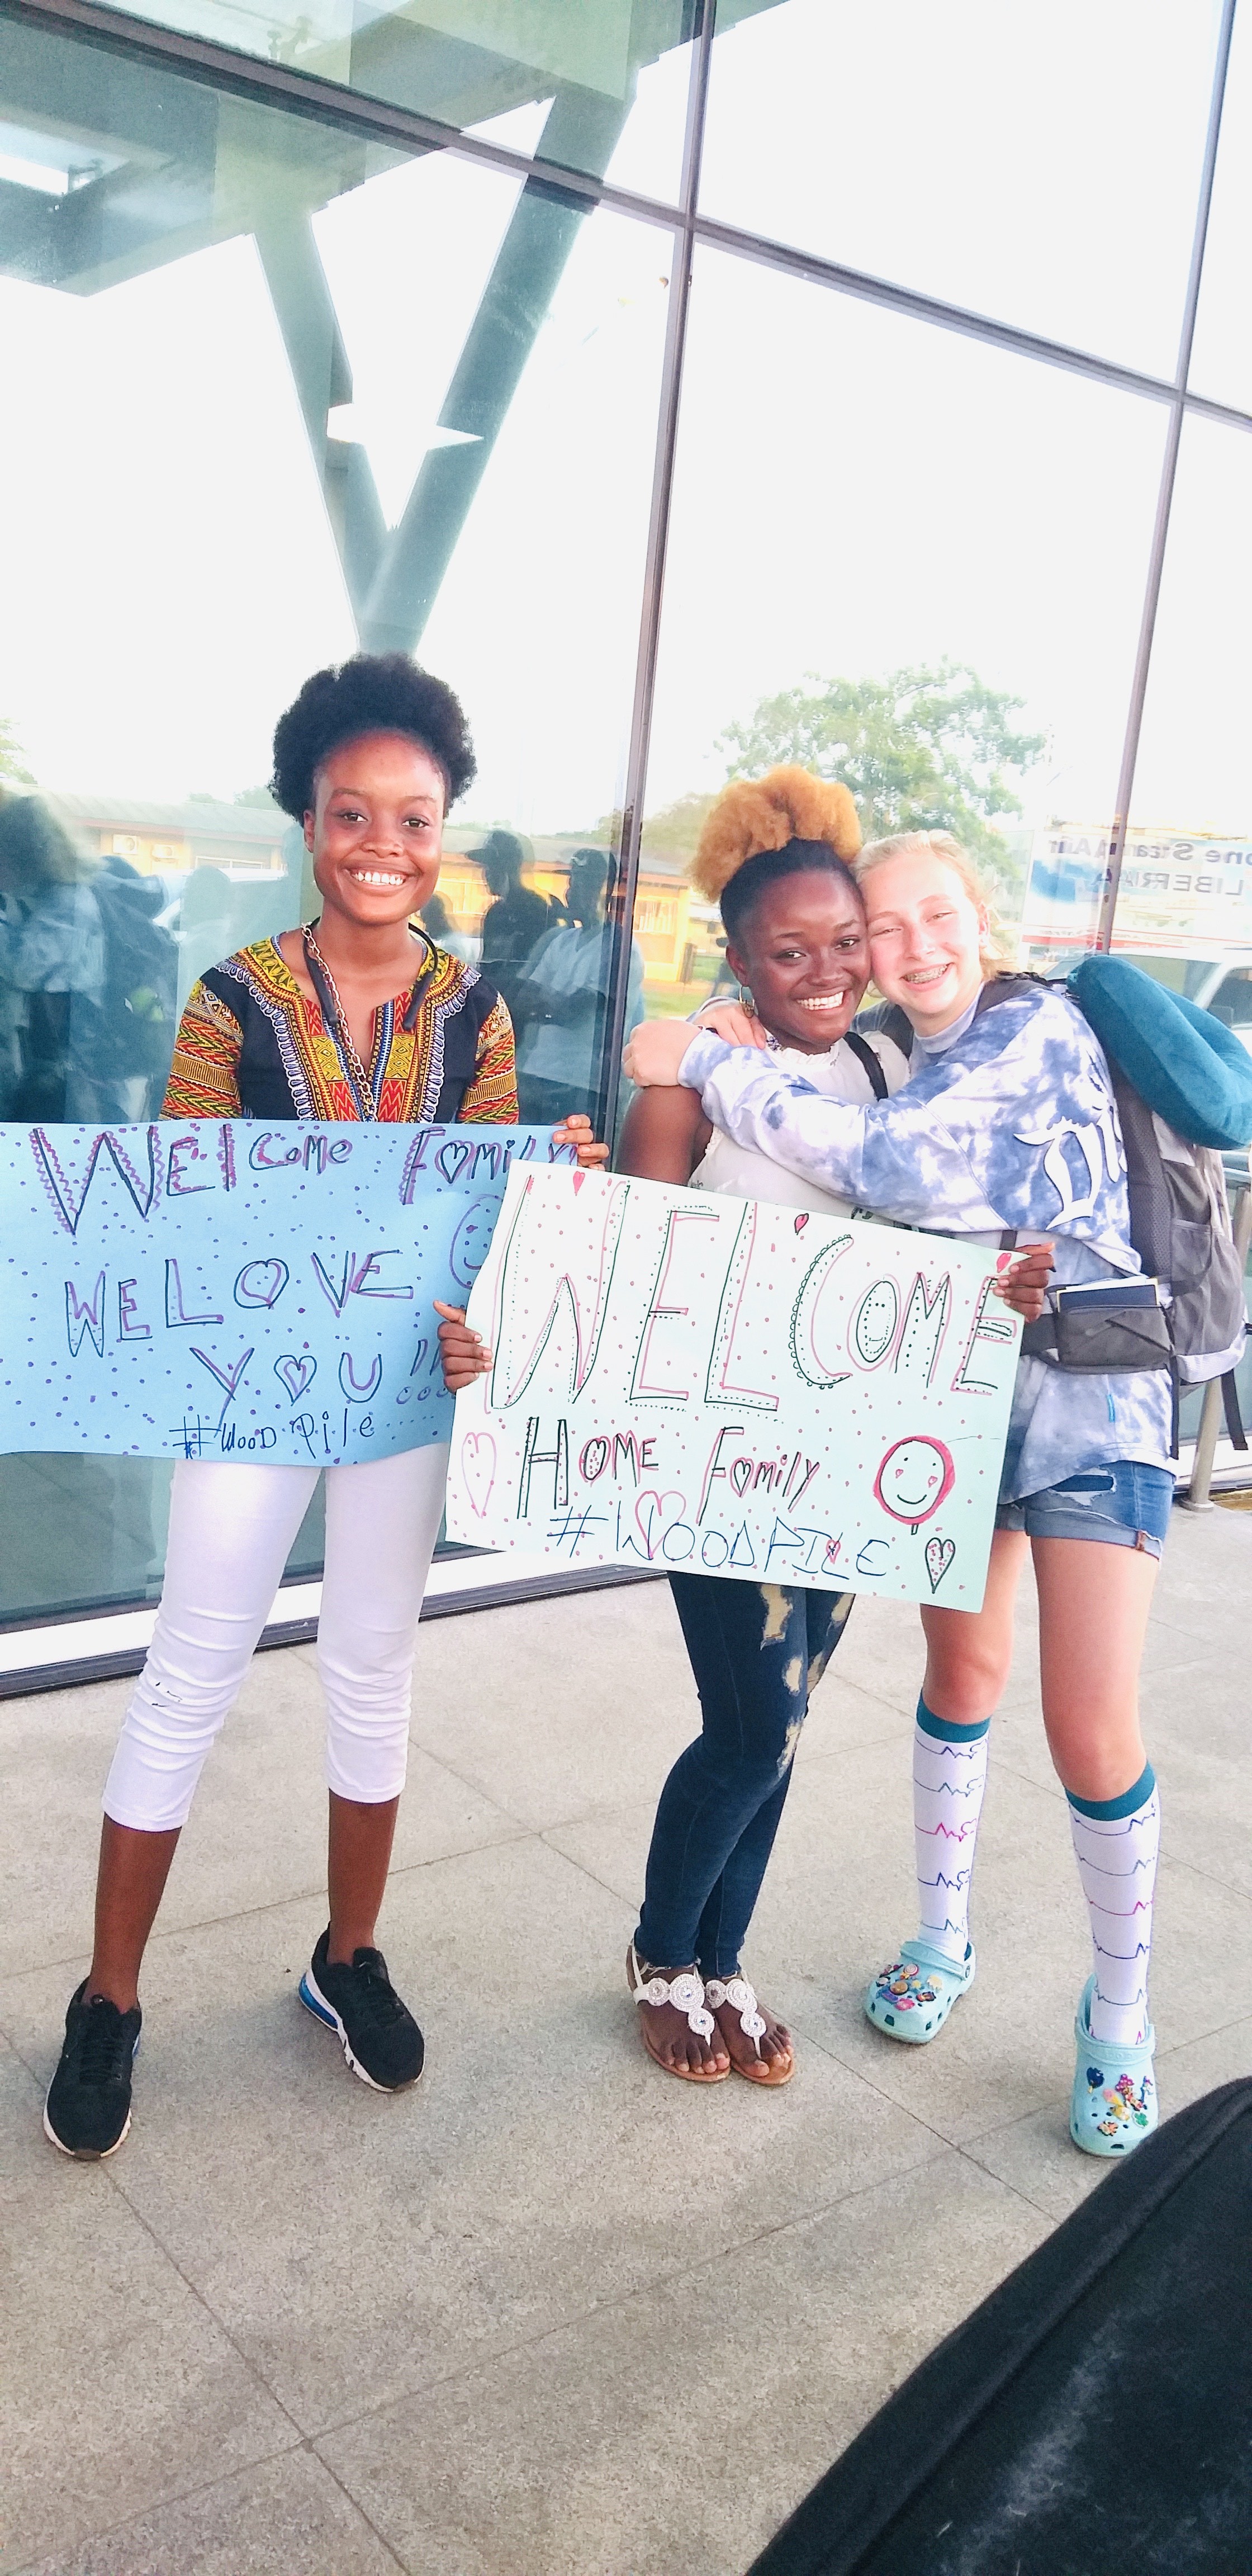 Antoinette greeting her host sister at the airport in Liberia